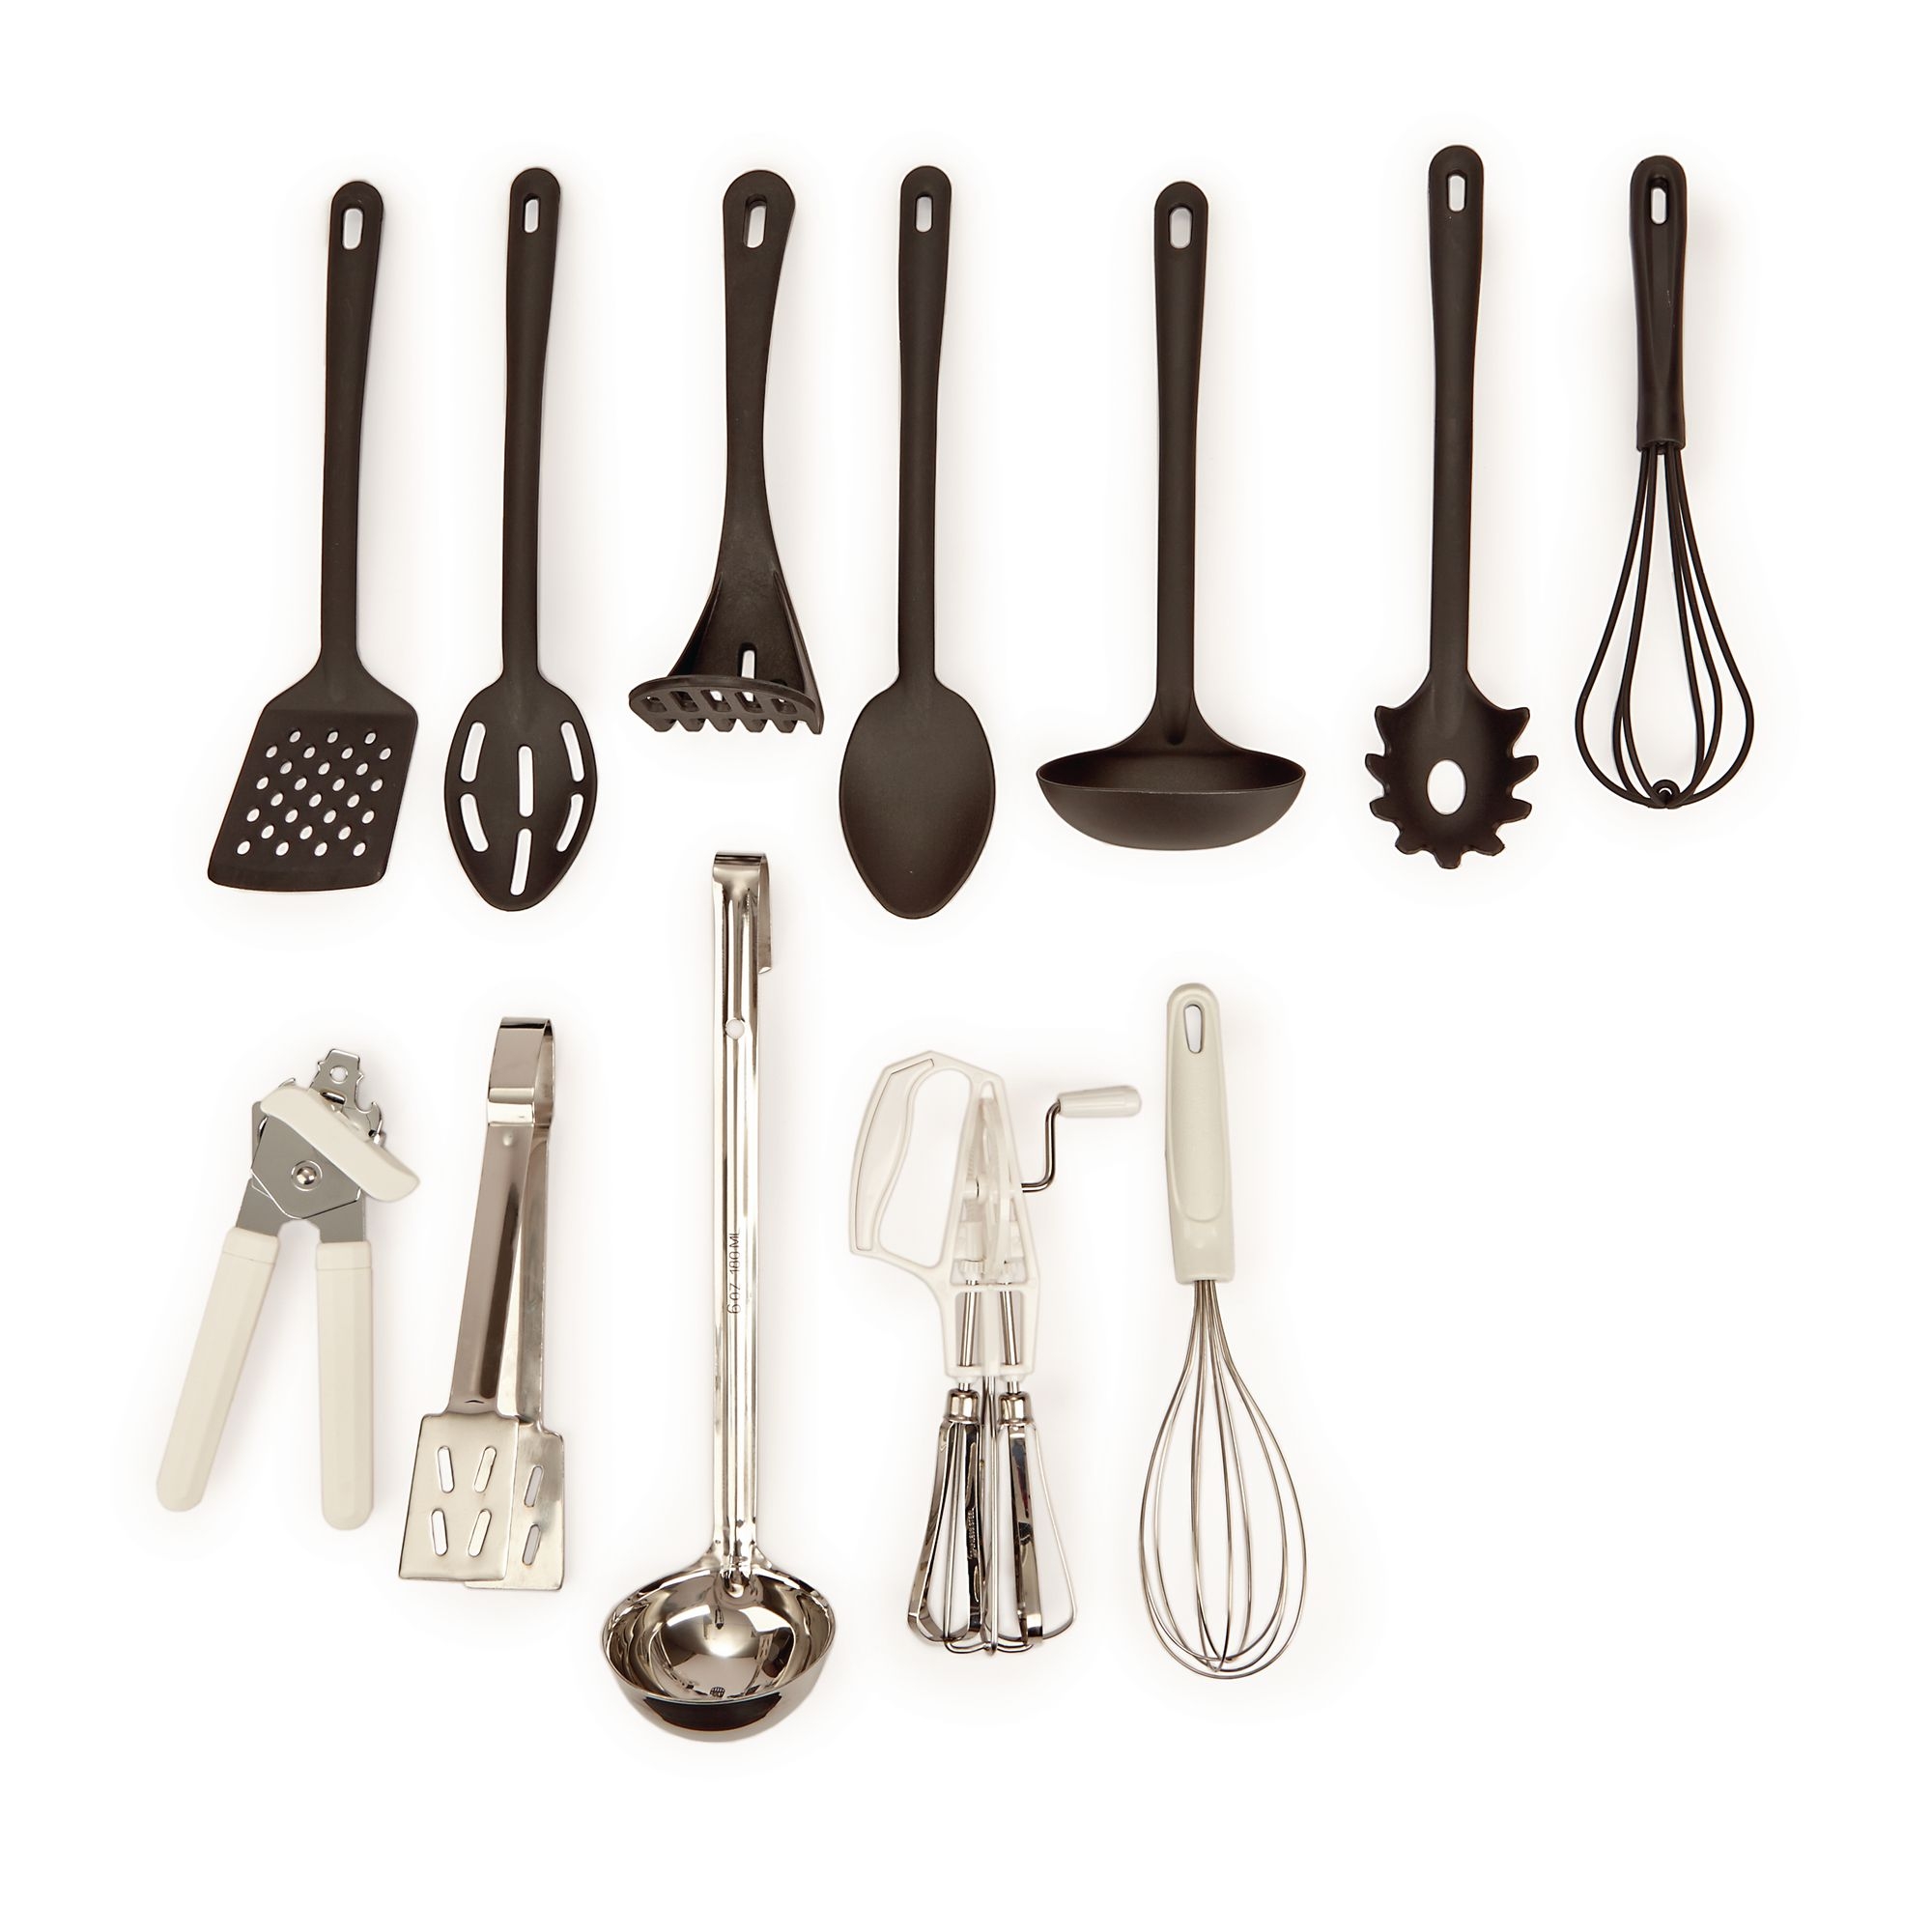 Non-Stick Kitchen Tools - Slotted spoon